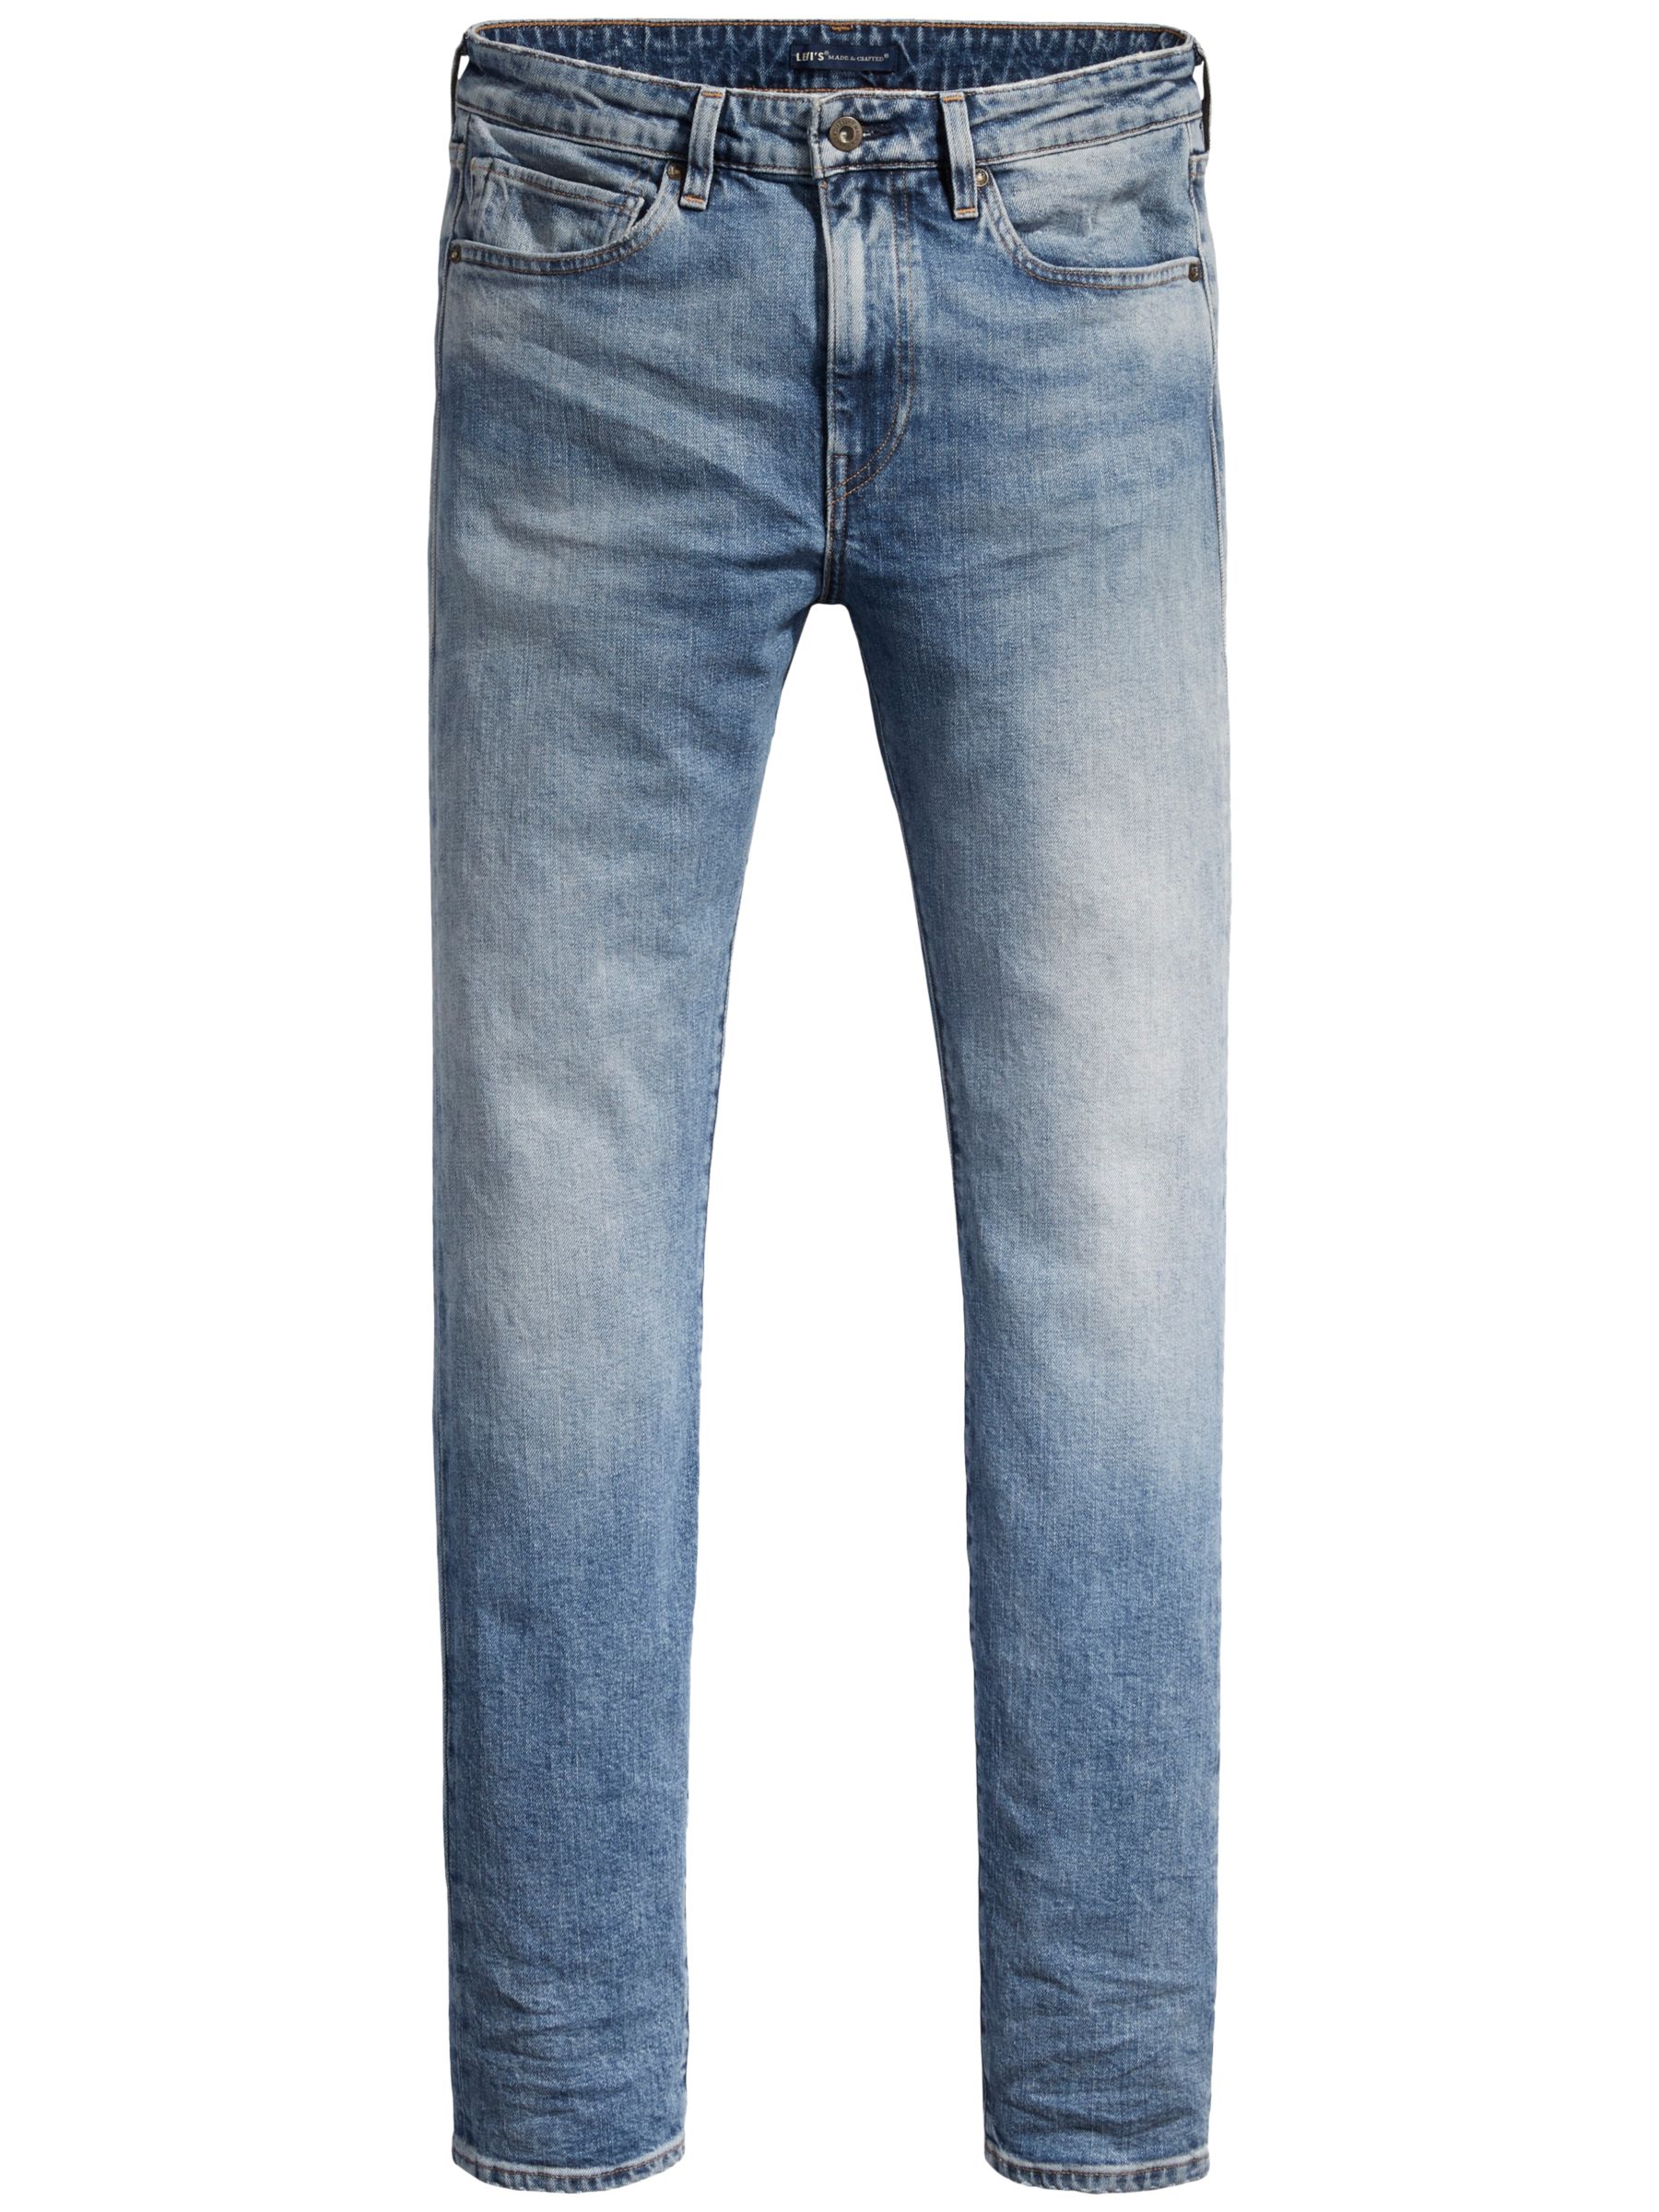 Levi's Made \u0026 Crafted Needle Narrow Fit 